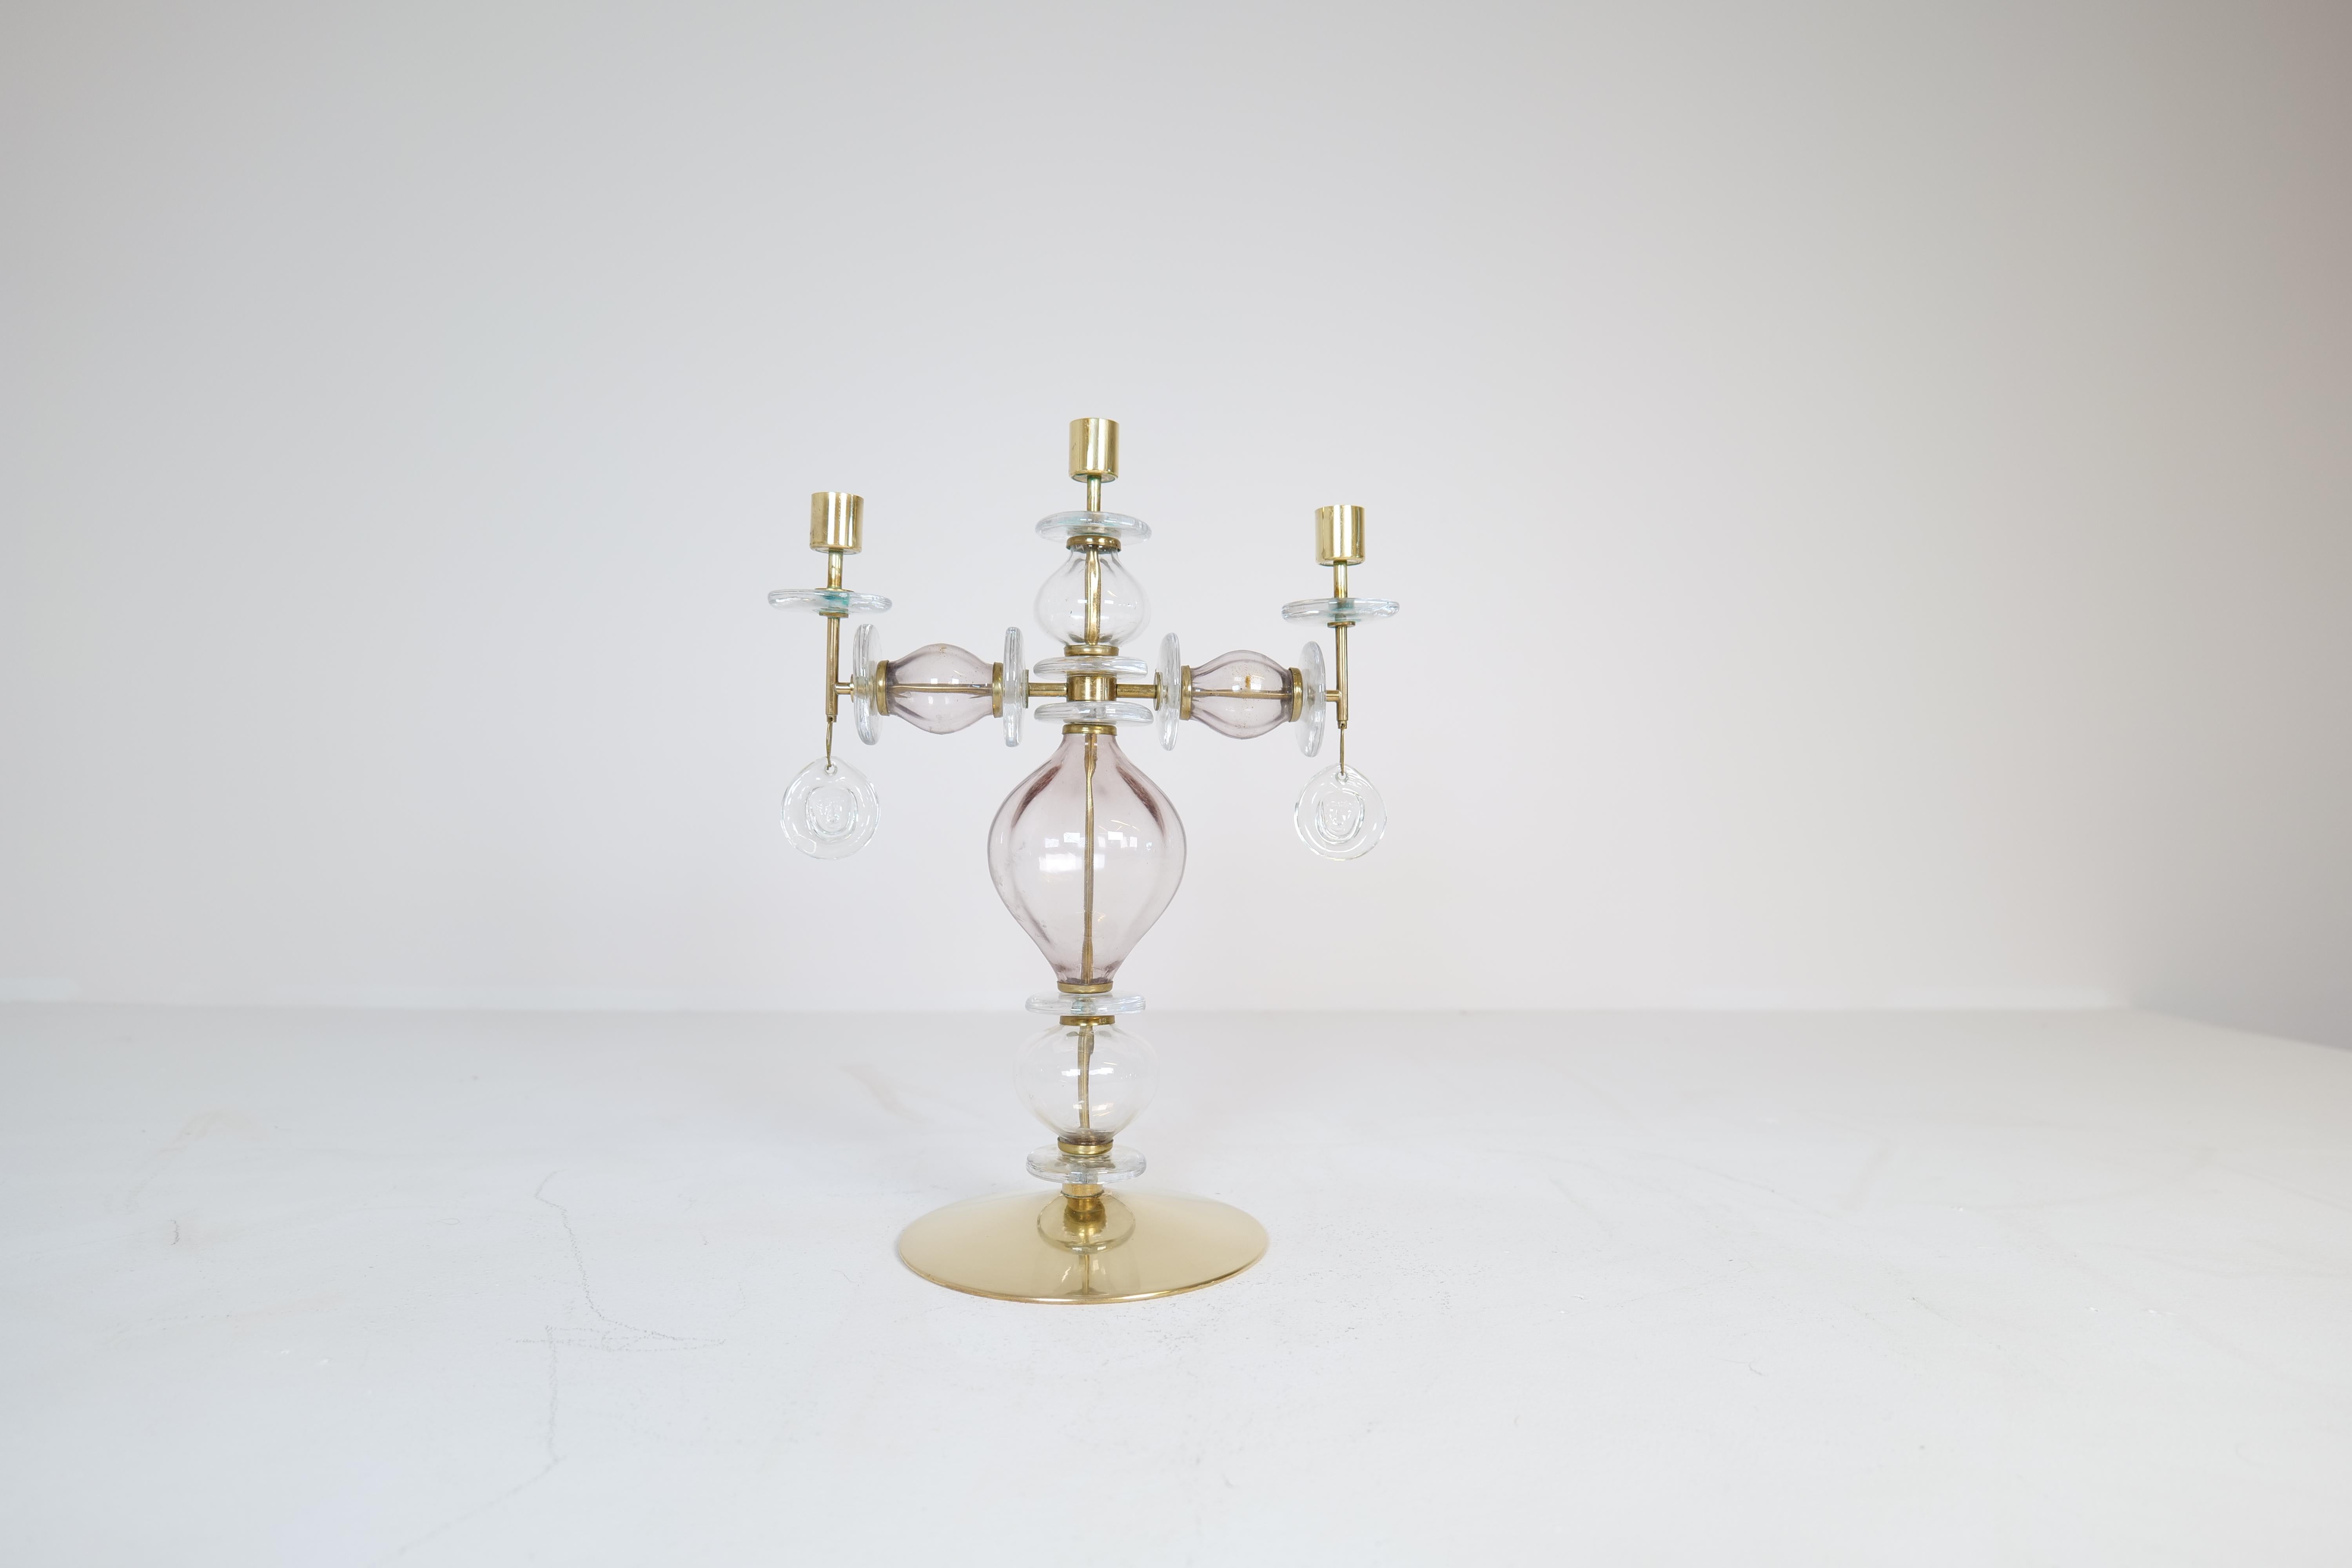 This large and not often found candelabra was manufactured at Boda and designed by Erik Höglund in Sweden during 1960-1970s.
Art handmade glass working perfect with the brass parts of the piece. The glass in white and purple color. 

Good vintage